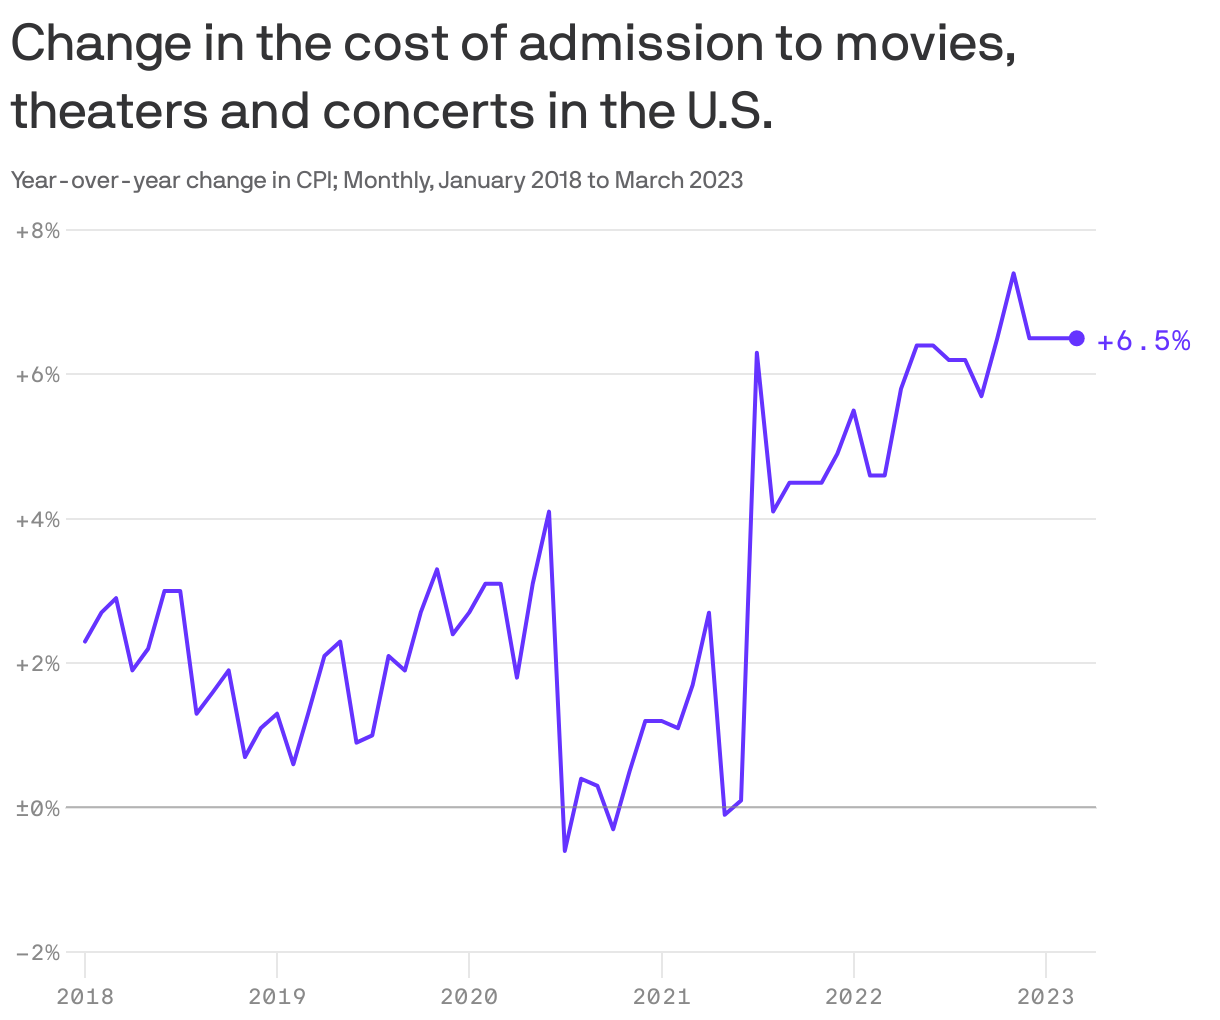 Change in the cost of admission to movies, theaters and concerts in the U.S.